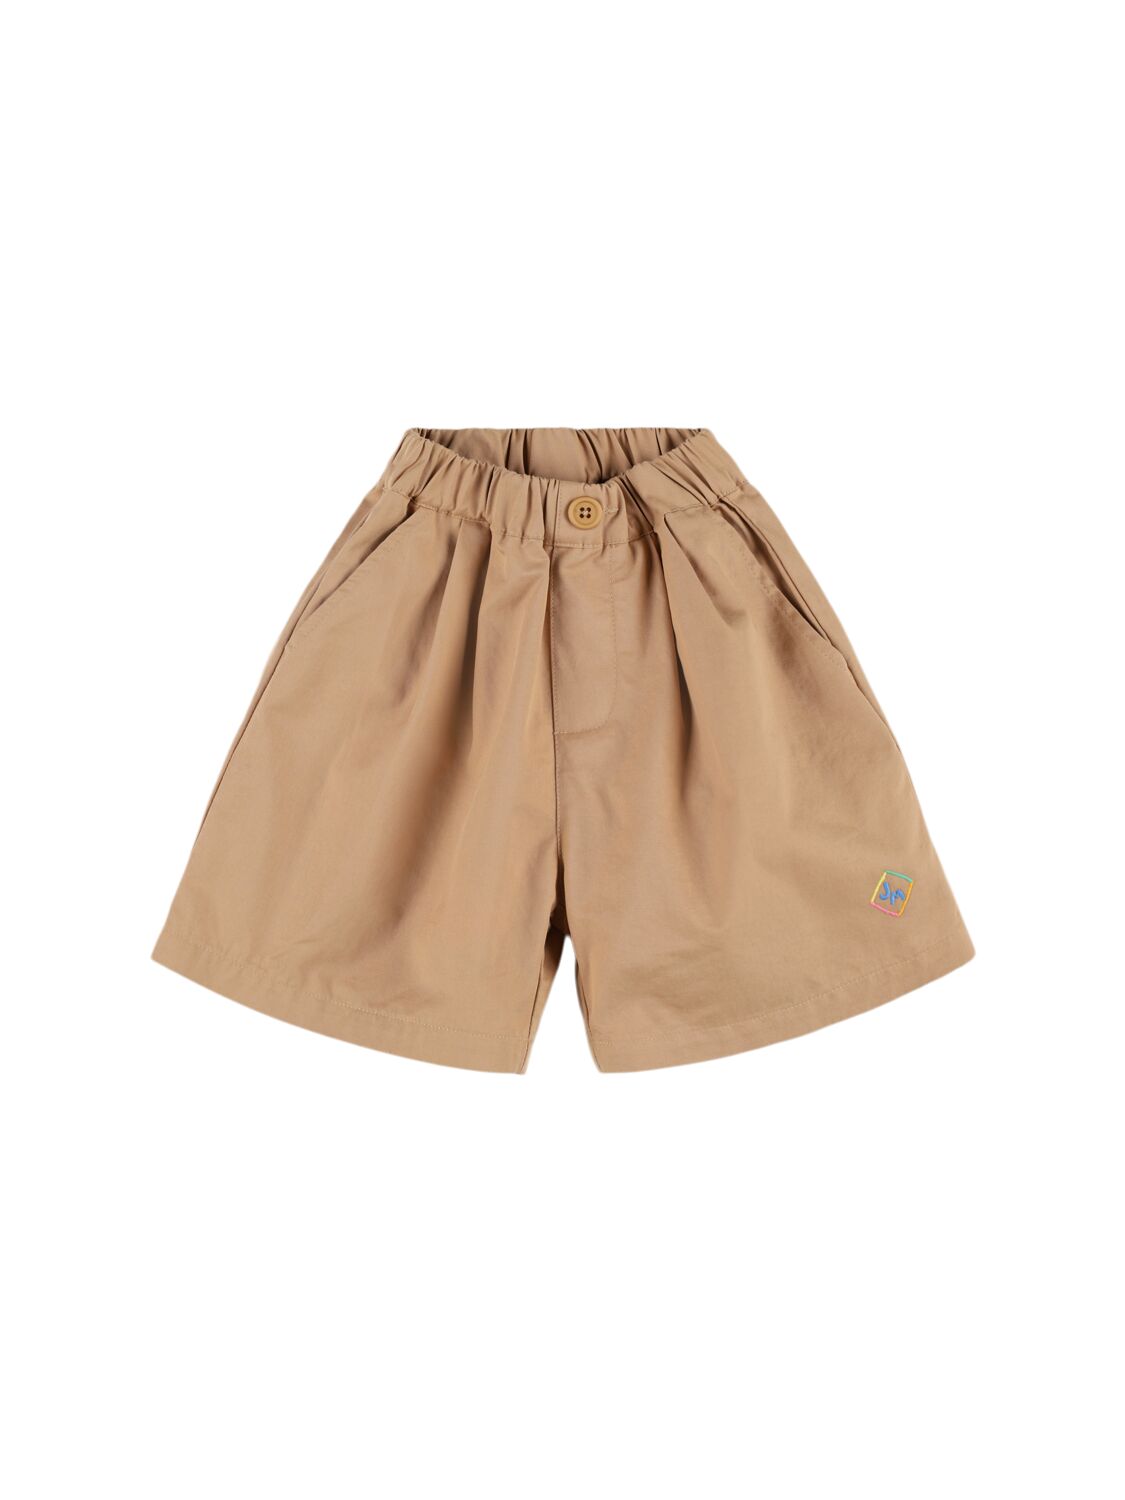 Image of Woven Cotton Shorts